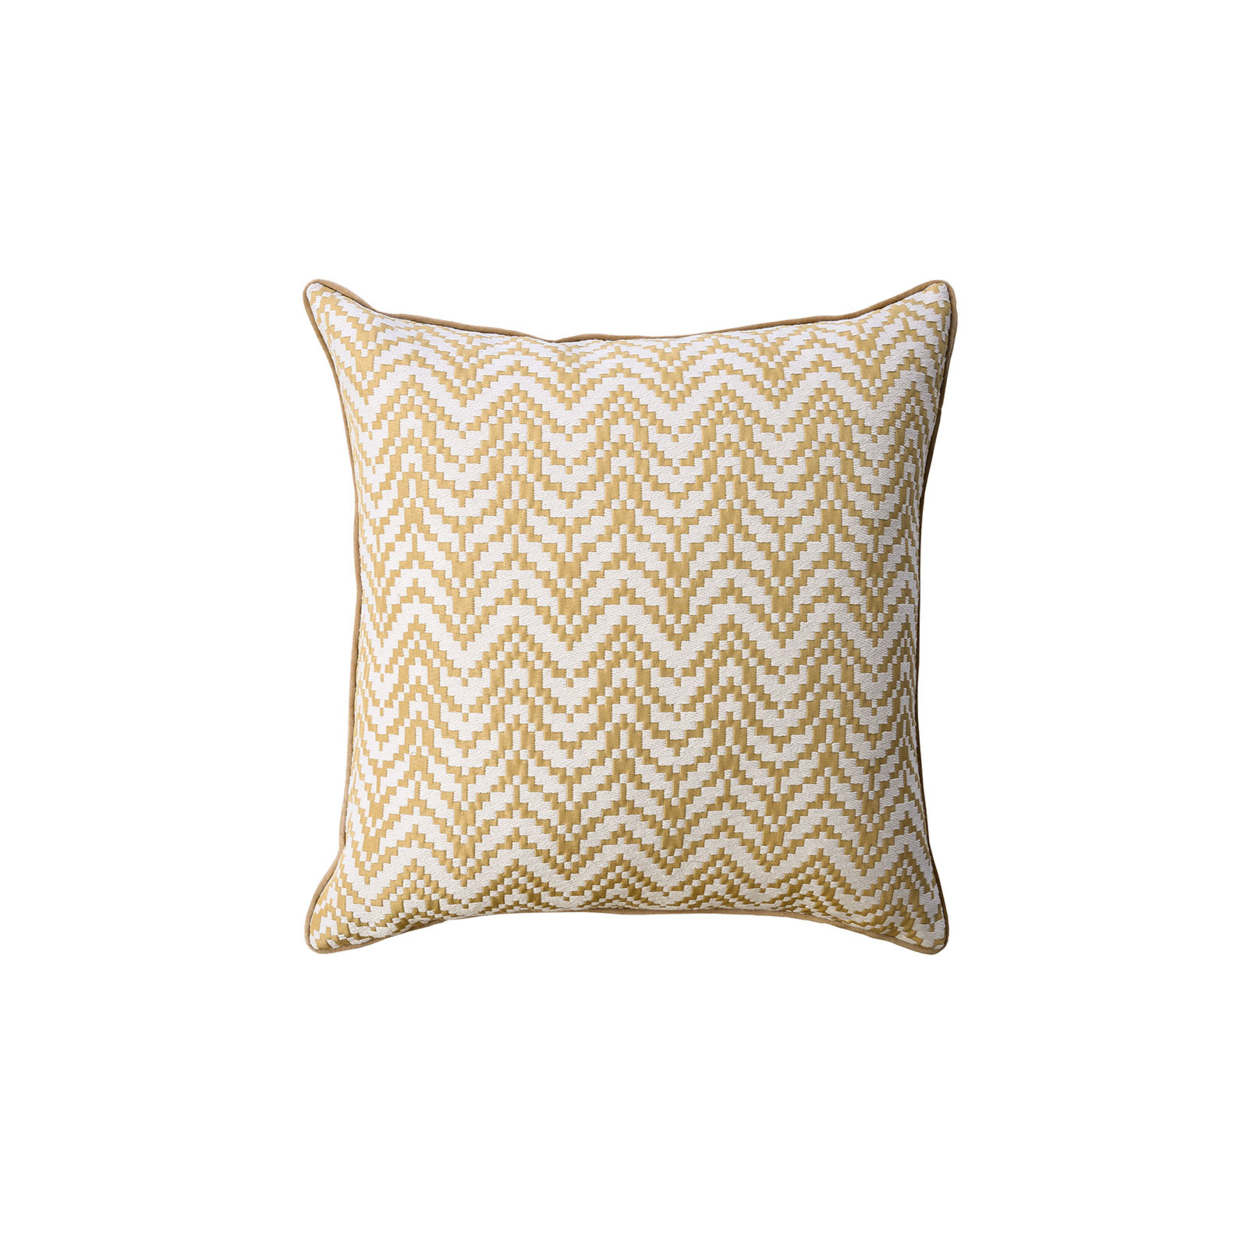 Contemporary Style Set Of 2 Throw Pillows With Zigzag Patterns, Gold- Saltoro Sherpi